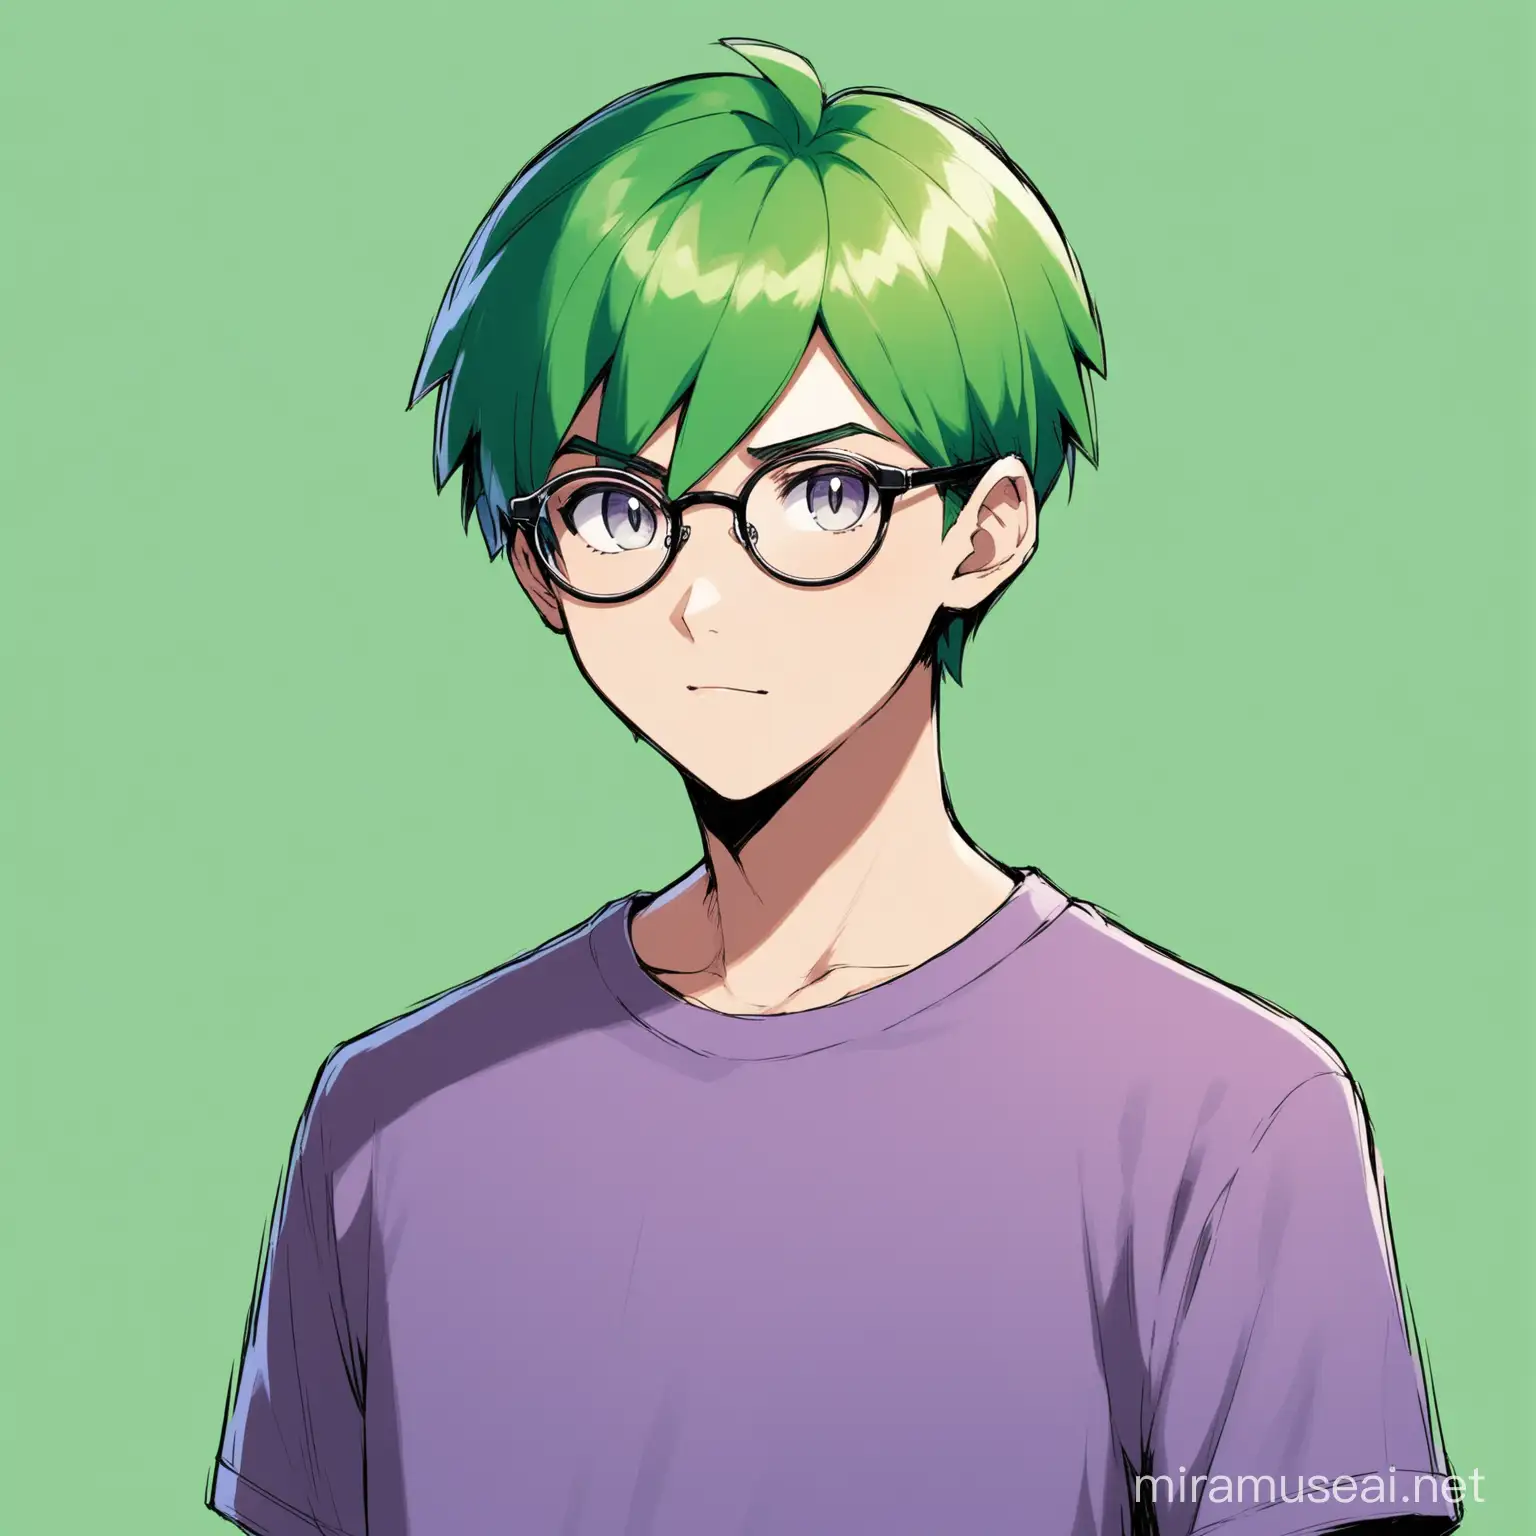 Pokemon Style Portrait of a GreenHaired Young Man with Grey Eyes and Glasses